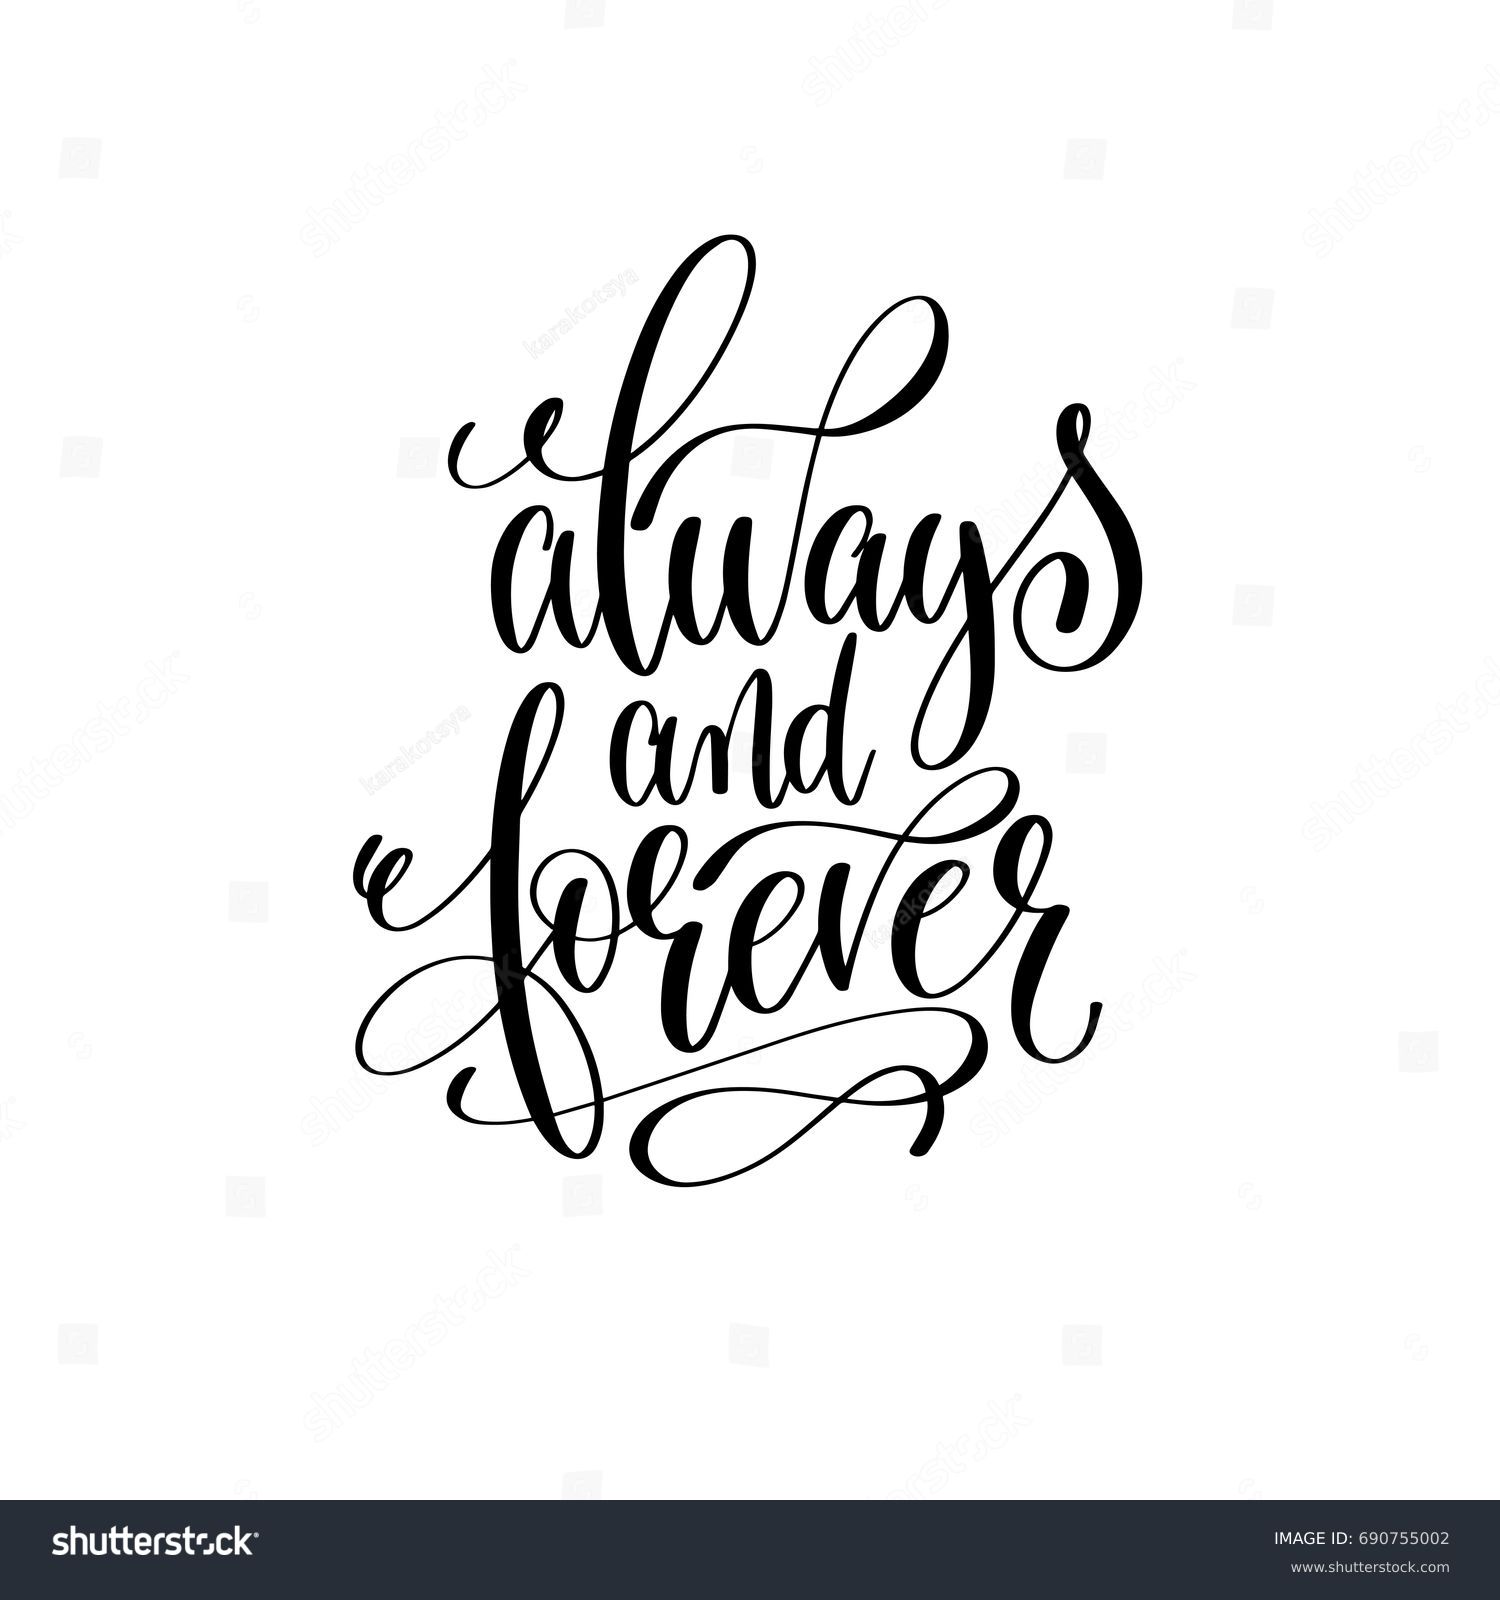 15,815 Quotes marriage Images, Stock Photos & Vectors | Shutterstock